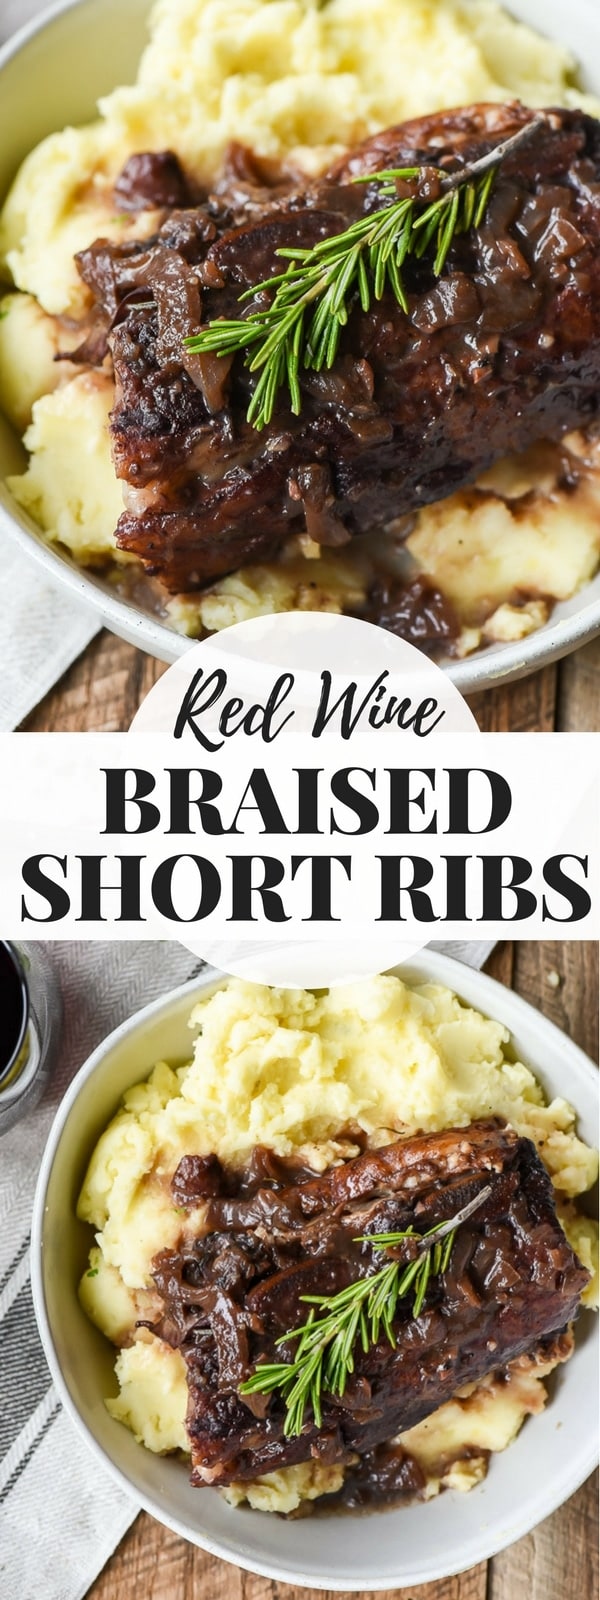 Red Wine Braised Short Ribs over mashed potatoes